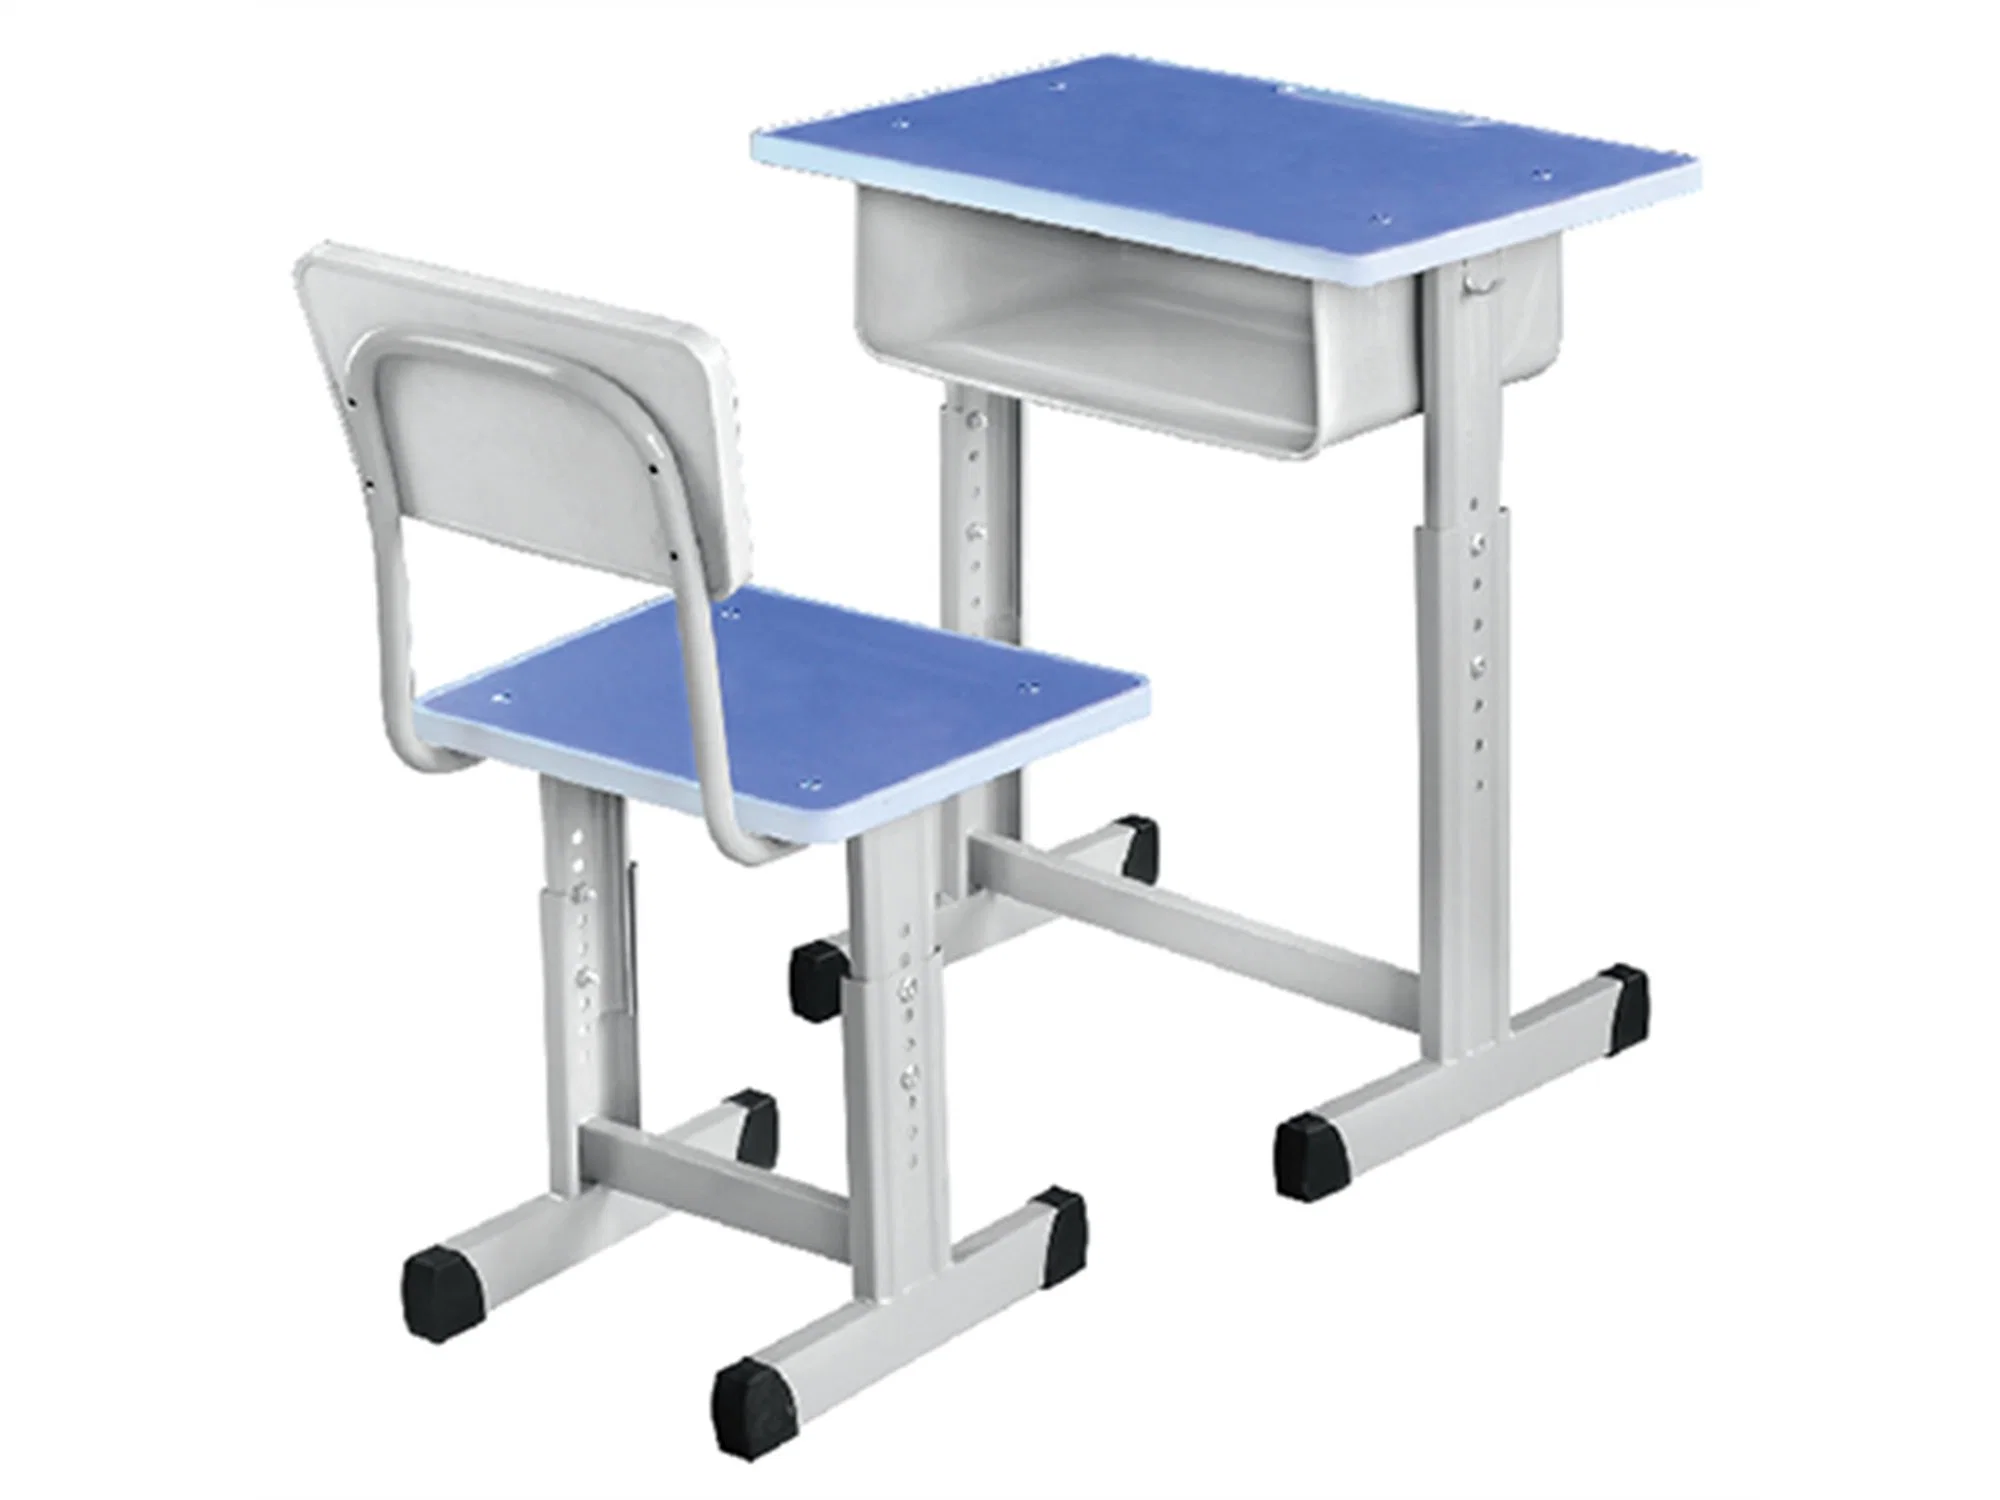 School Ladder Classroom Student Study Educational Furniture Adjustbale Table Desk Lecture Hall Seating College University Auditorium Train Desk Seat Chair